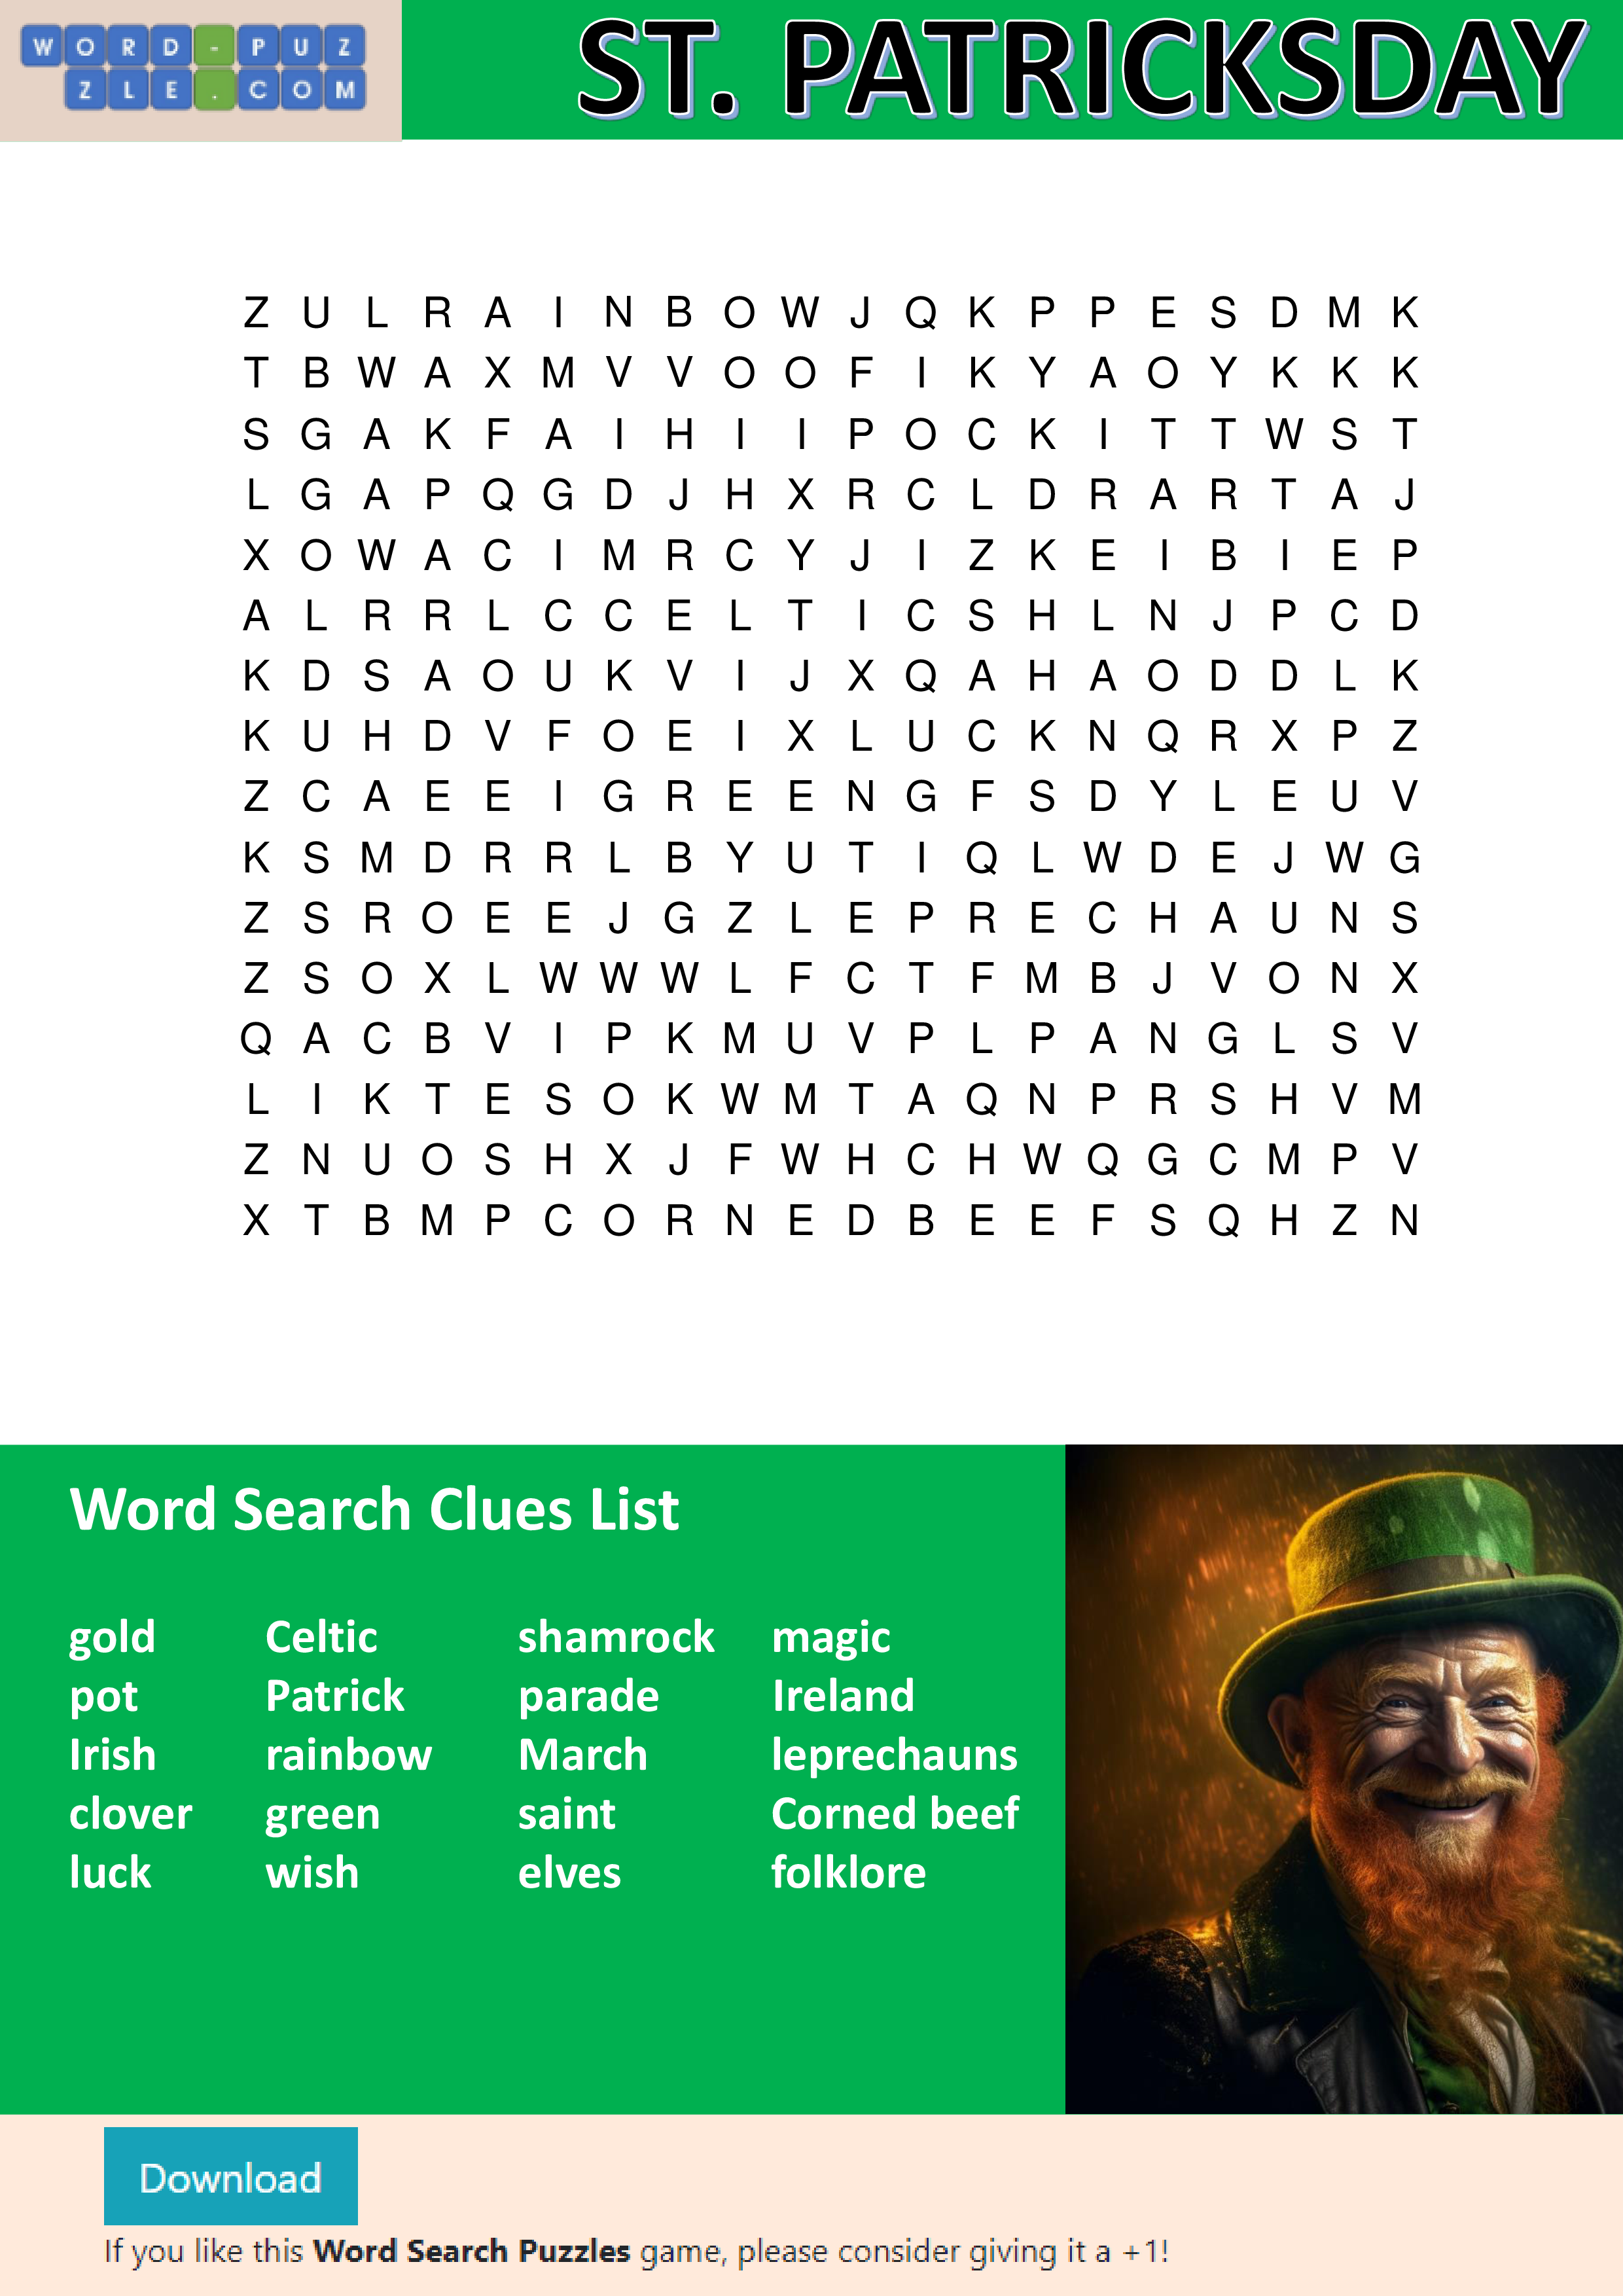 saint patrick's day word search template